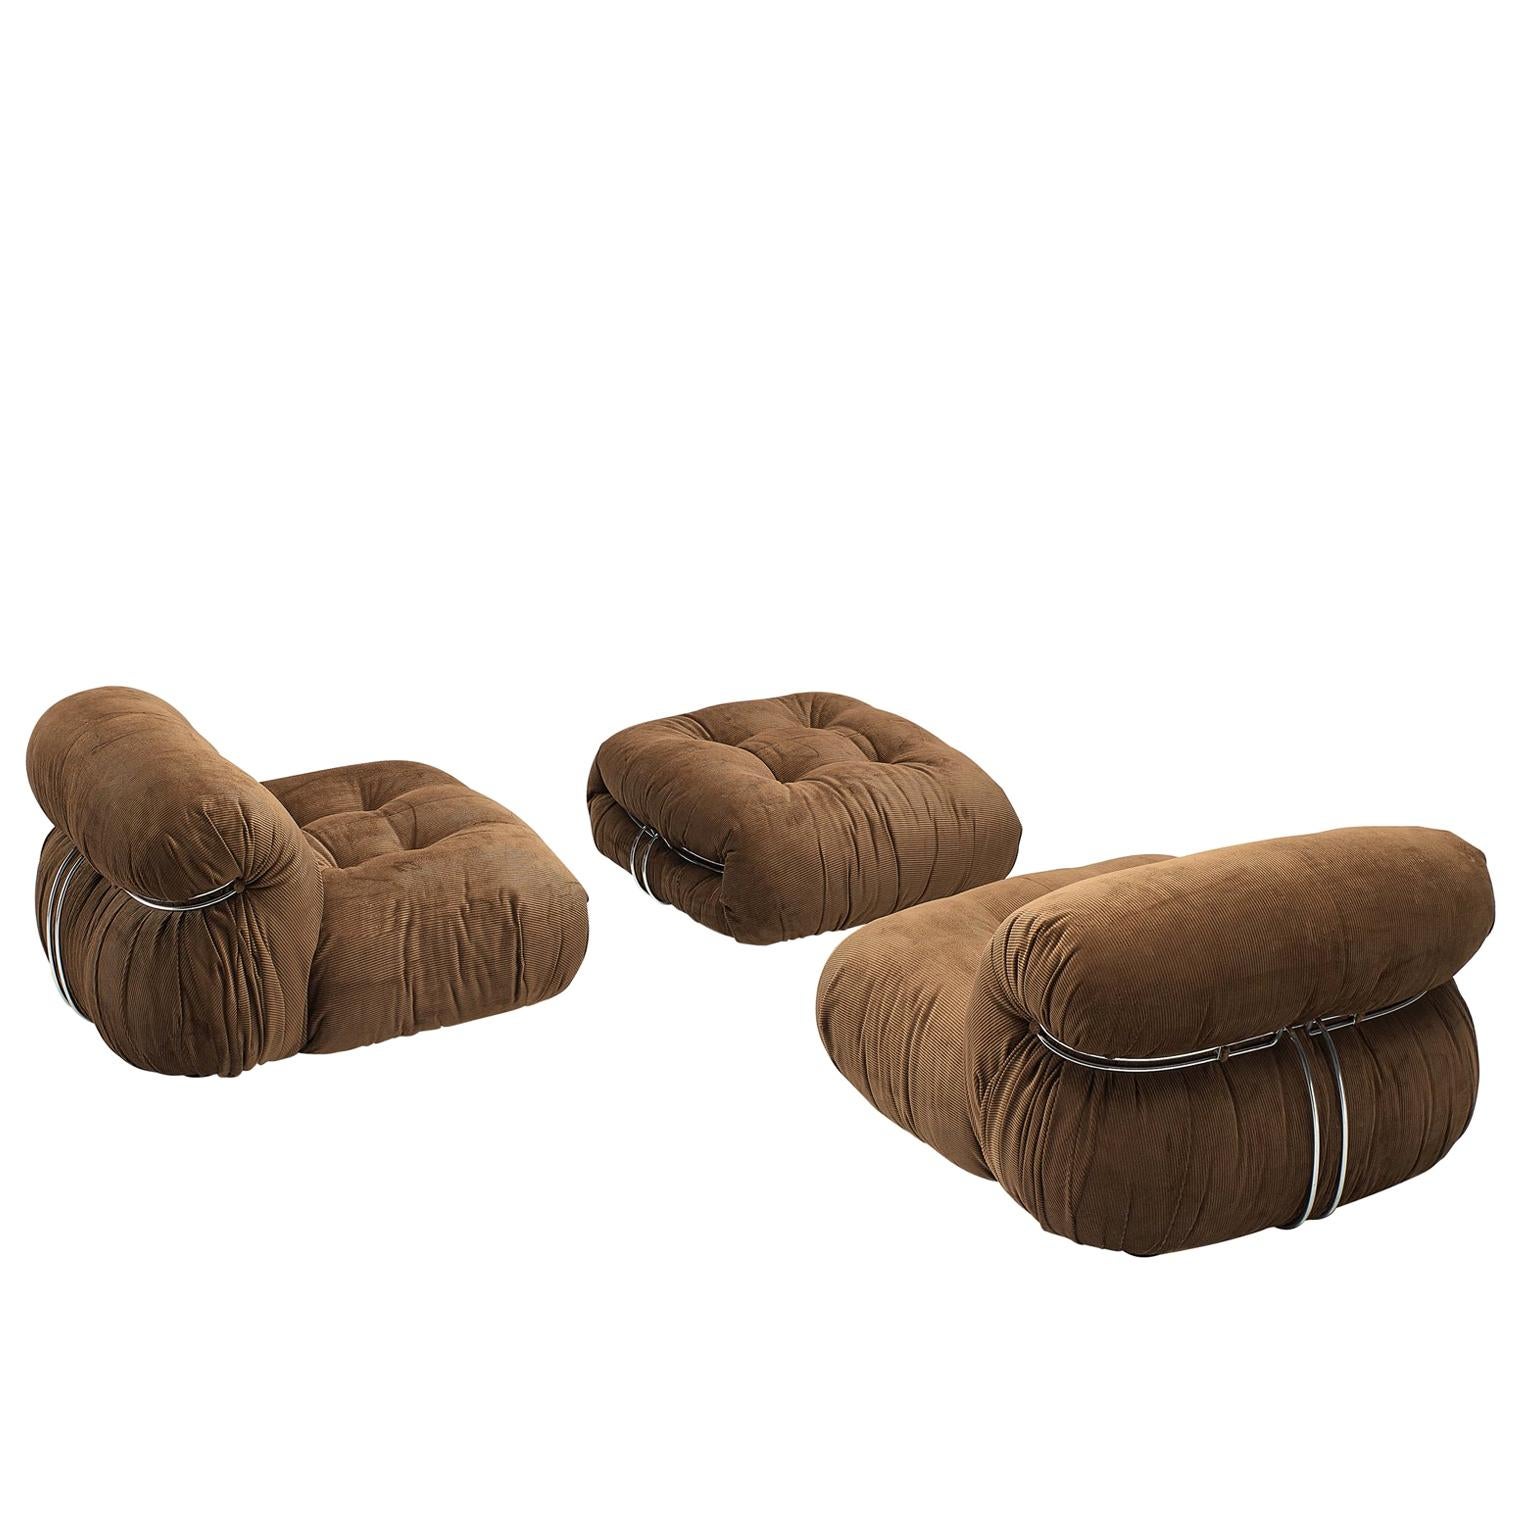 For Jessica: Scarpa Set of 'Soriana' Lounge Chairs with Ottomans 2/2